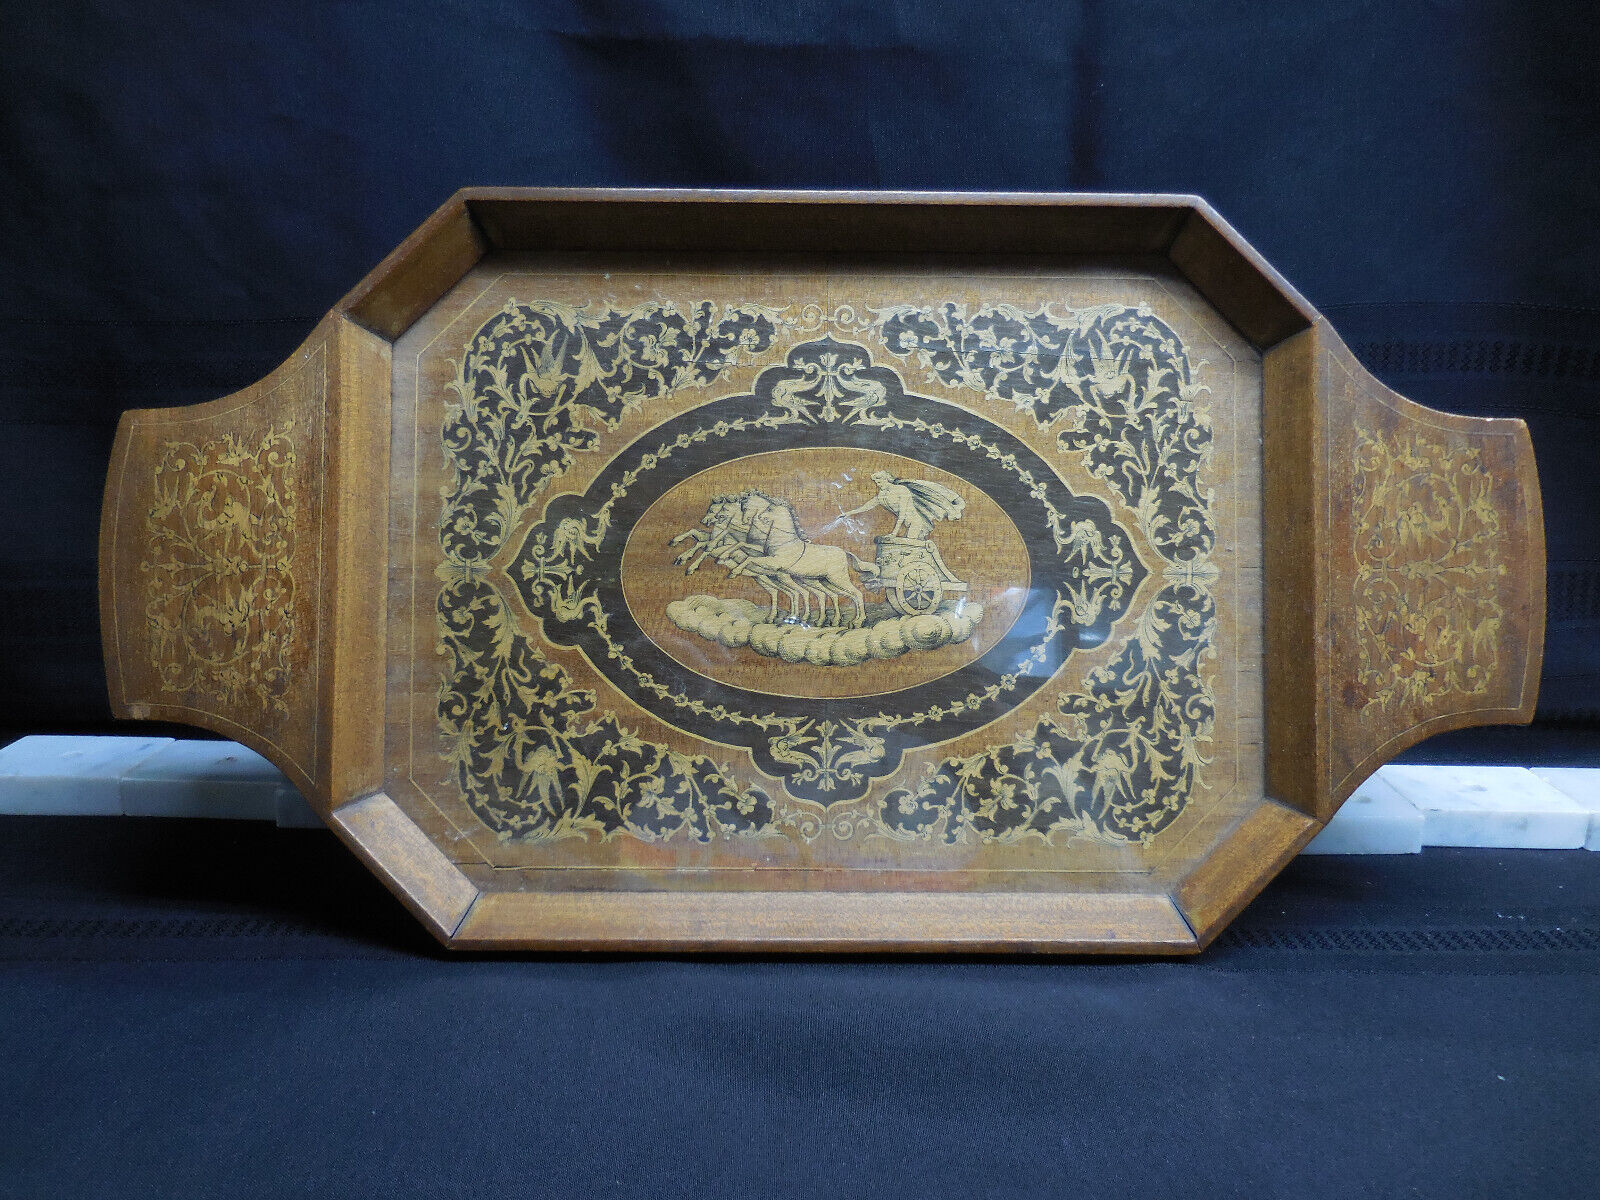 Vintage late 1800s neoclassical Music Box Wood Serving Tray, plays “O Sole Mio”